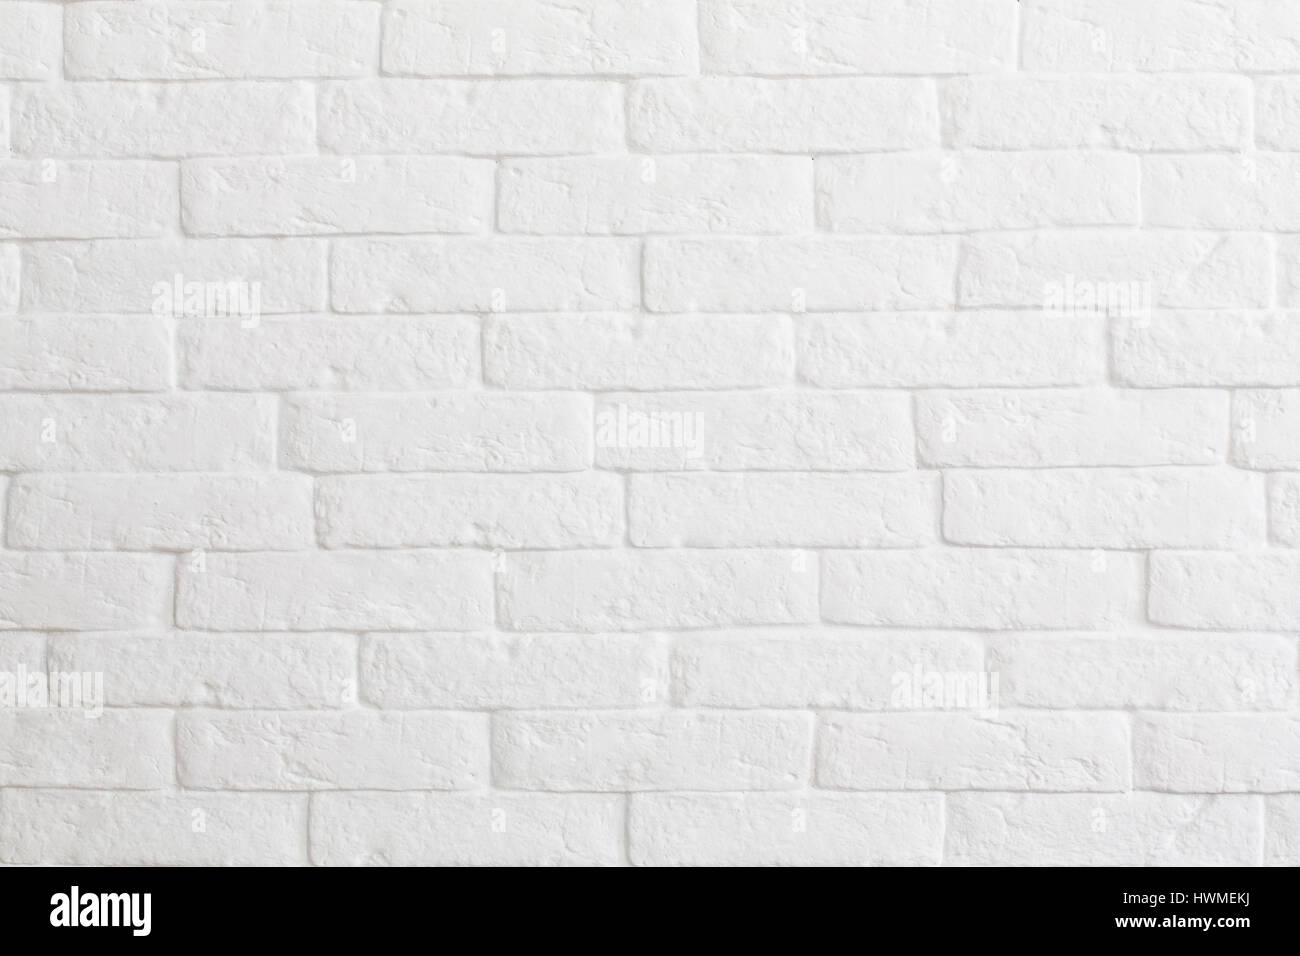 White brick wall background Banque D'Images